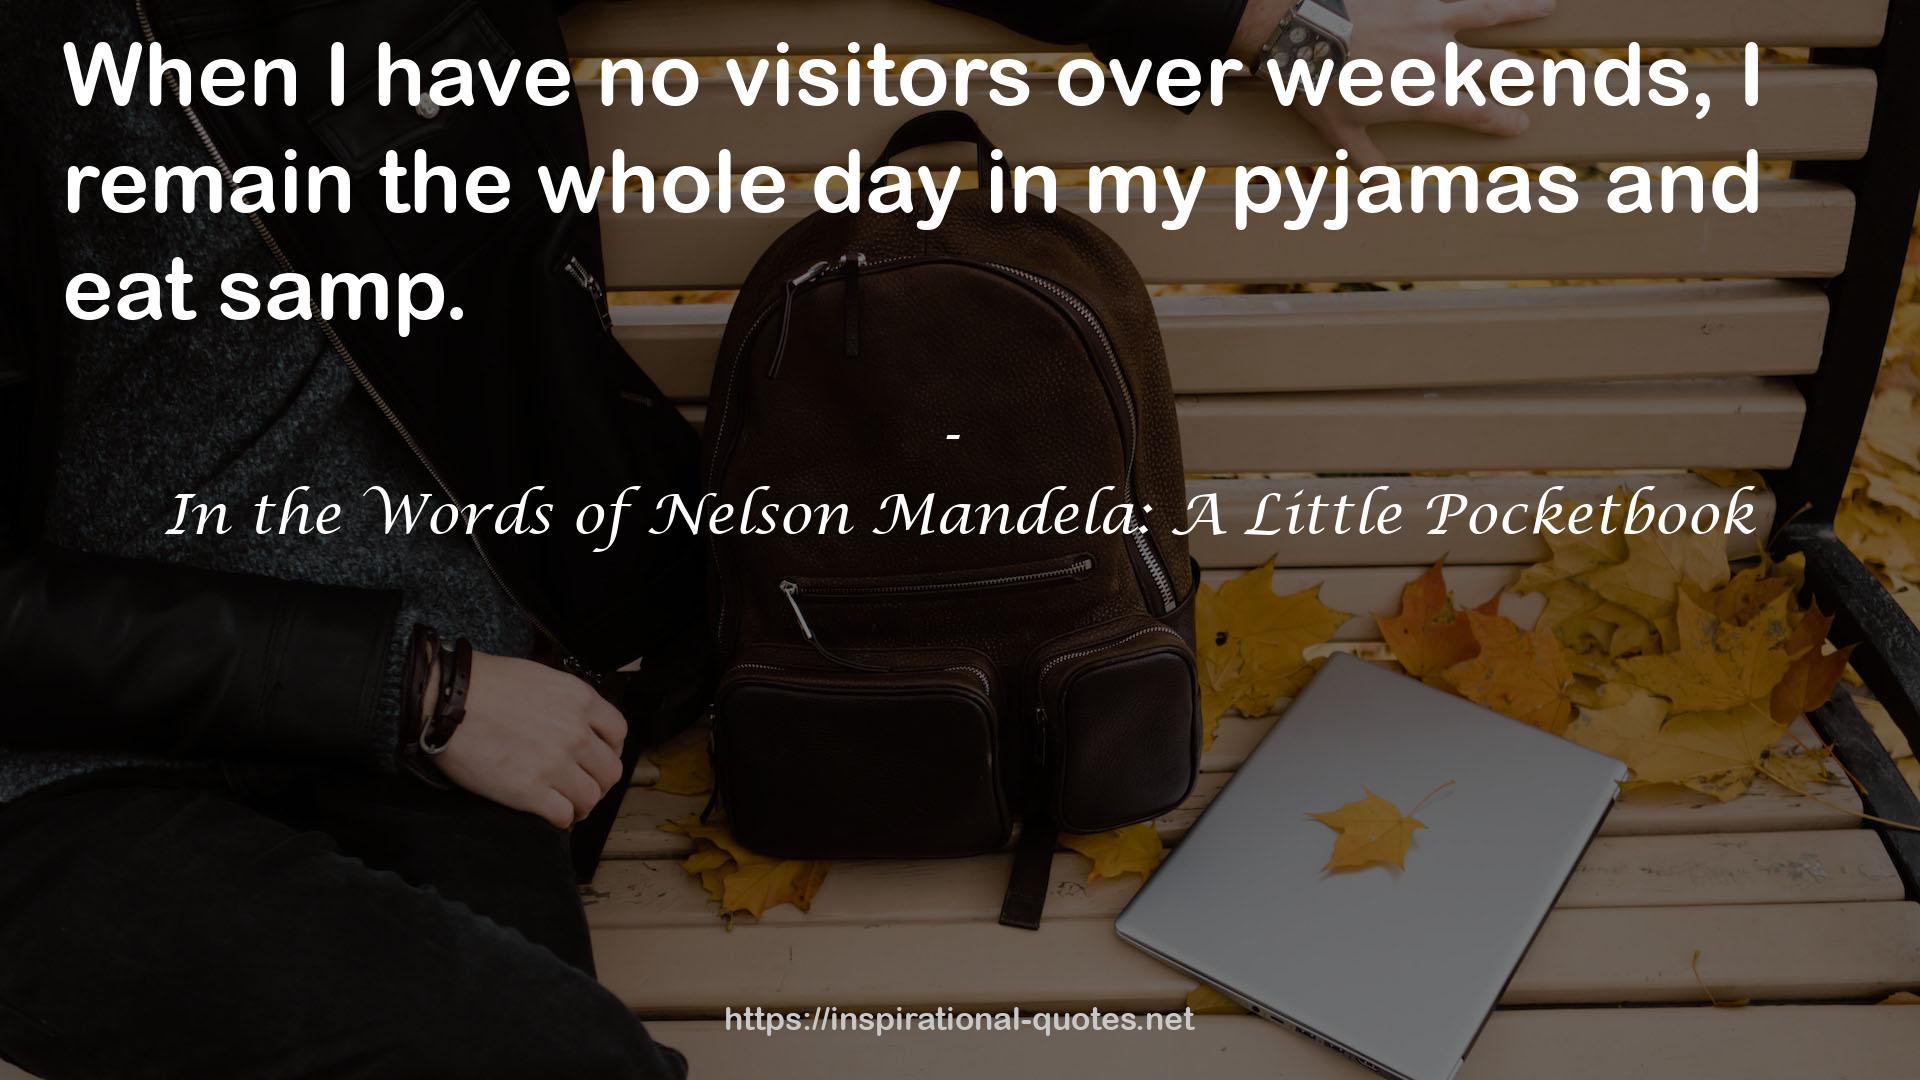 In the Words of Nelson Mandela: A Little Pocketbook QUOTES